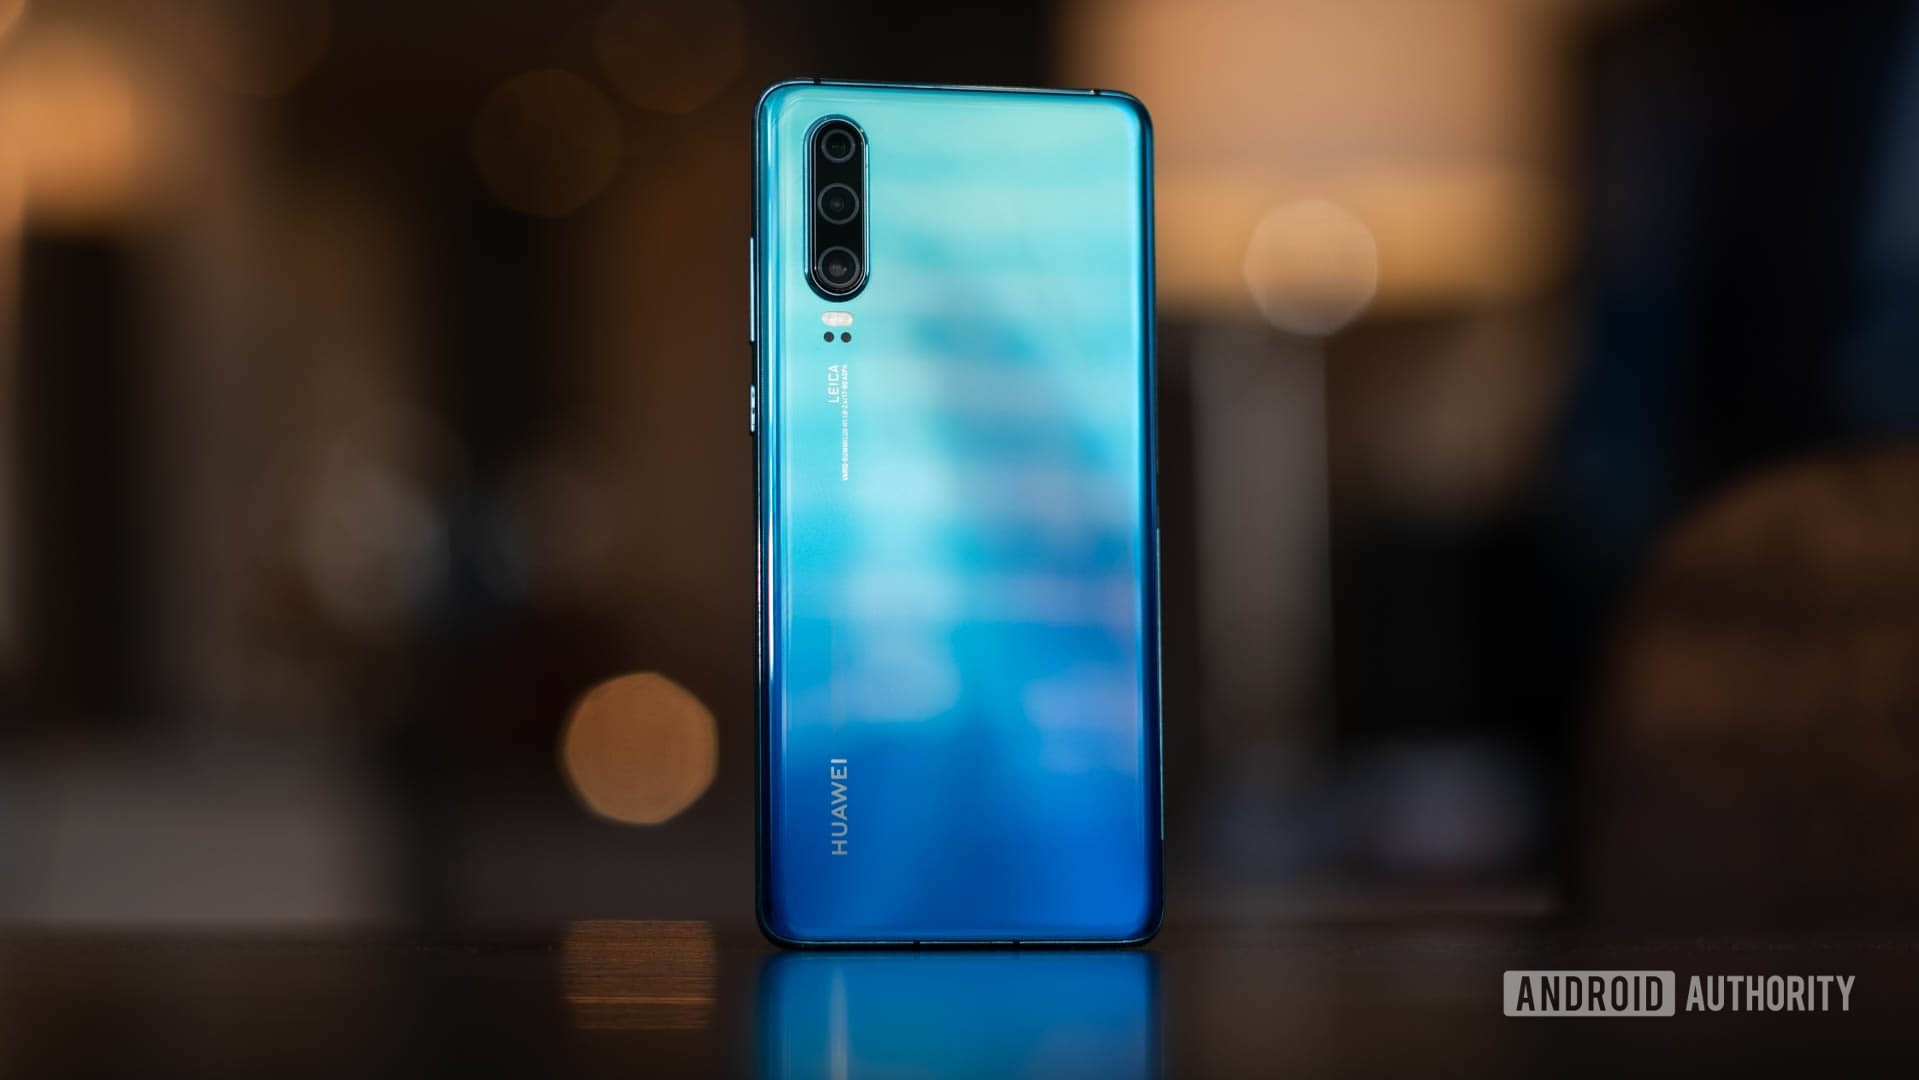 HUAWEI P30 review: High cost of entry for would-be OnePlus 6T killer